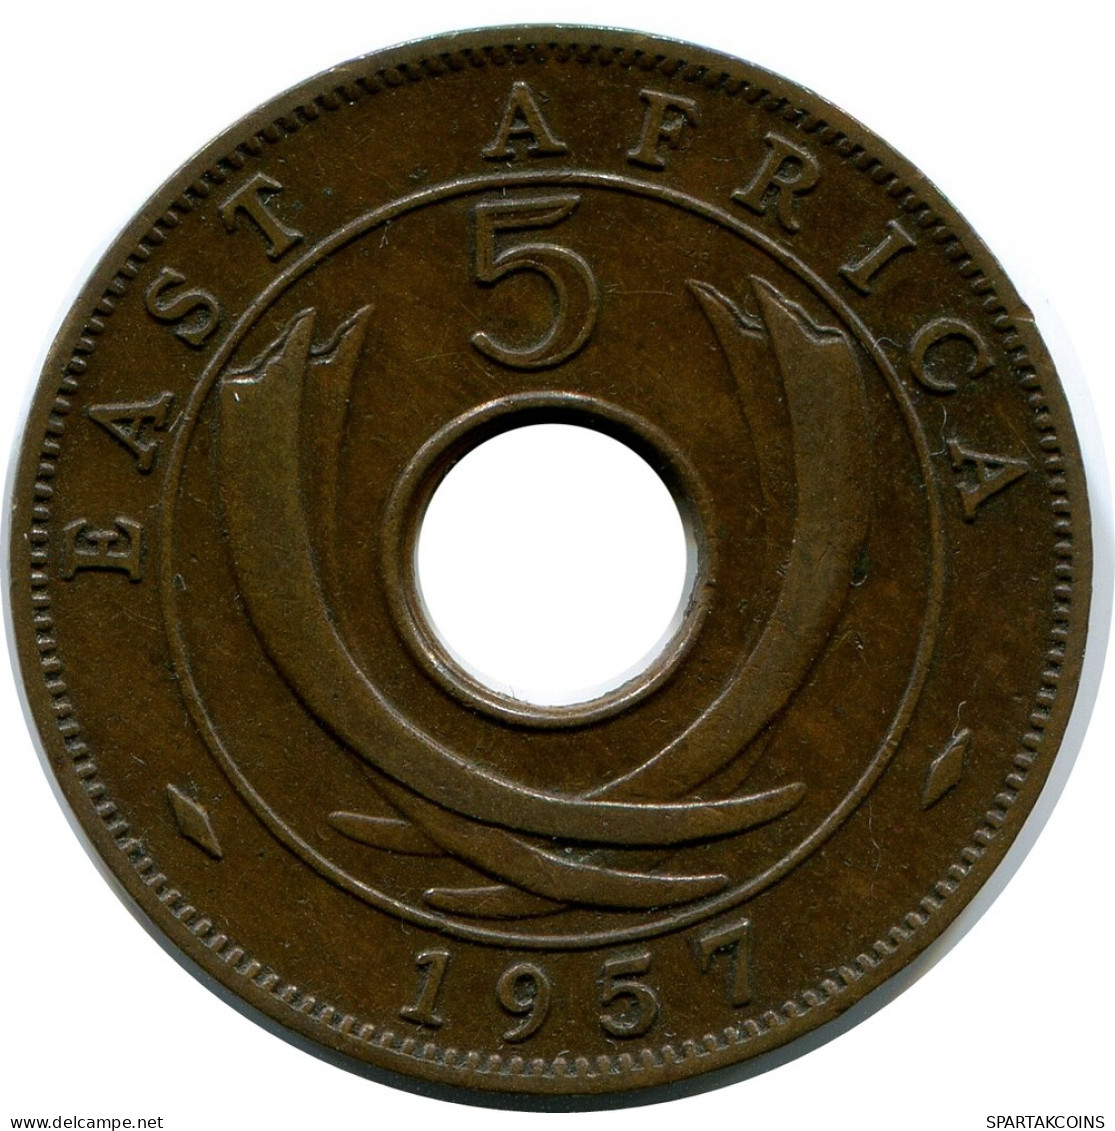 5 CENTS 1957 EAST AFRICA Coin #AP874.U - British Colony